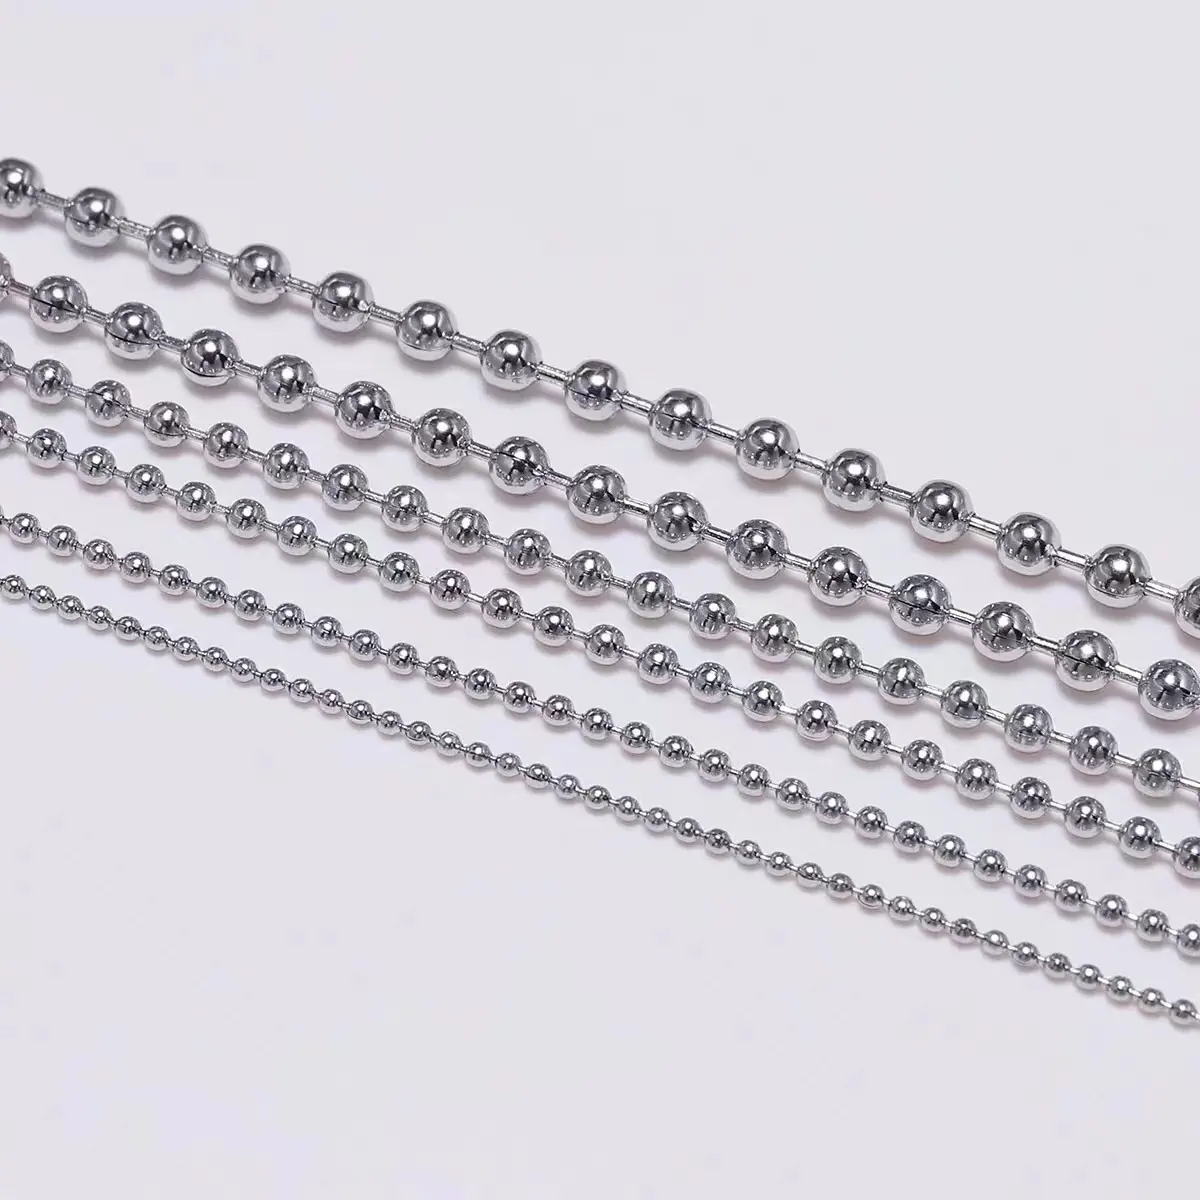 Multi Size Stainless Steel Bead Ball Necklace Military Dog Tag Chain for Men Women